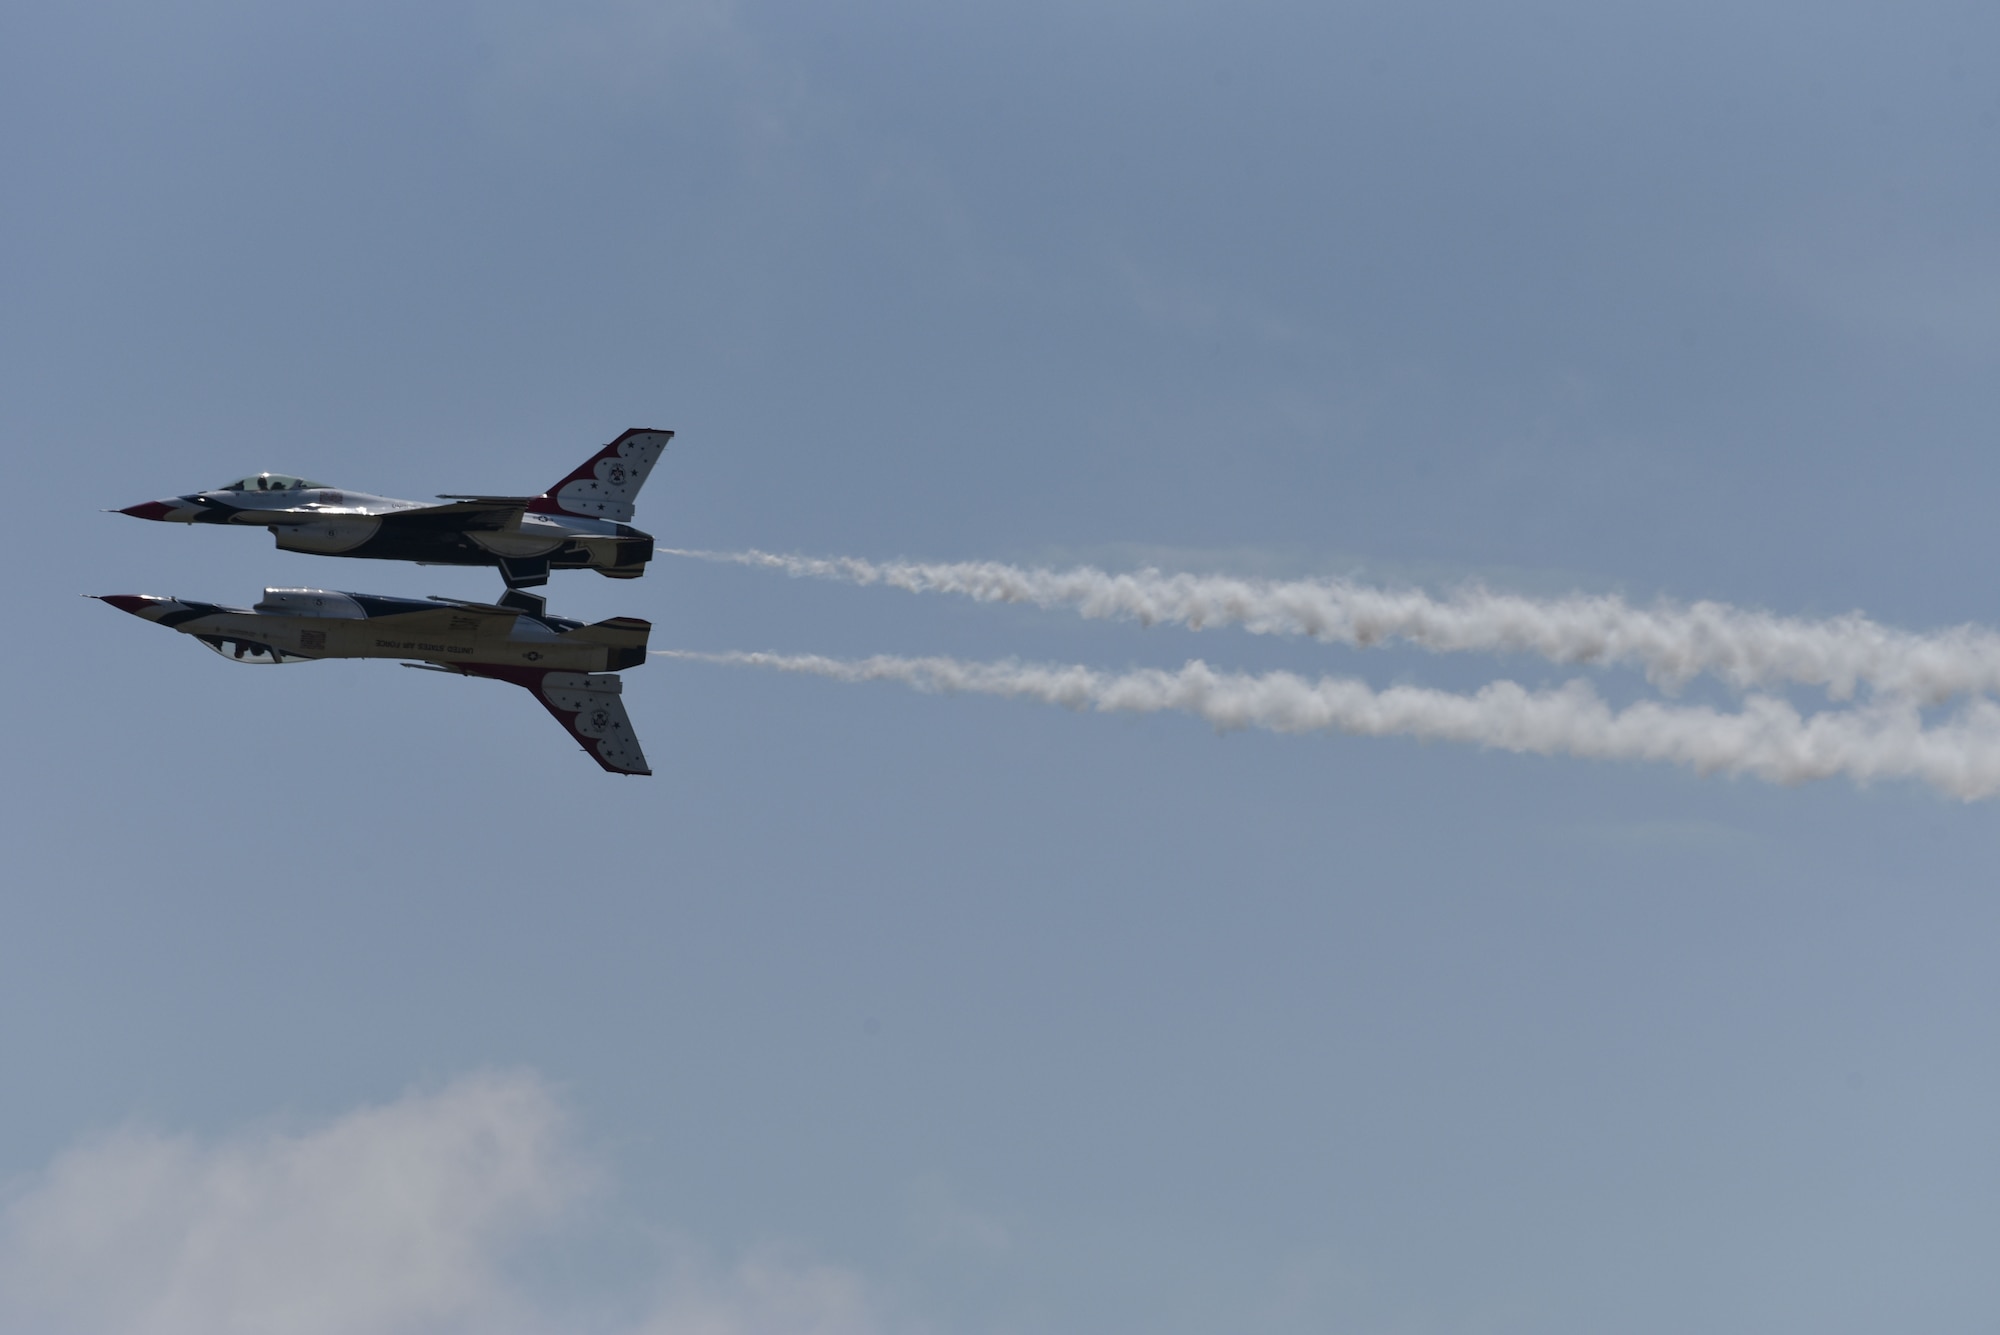 U.S. Air Force Thunderbirds perform a reflection pass stunt during Cheyenne Frontier Days, July 25, 2018, in Cheyenne, Wyo. The Thunderbirds fly closely in formation and make close passes at intense speeds during their shows showcasing their skills as an aerial acrobatics team. The airshow provides a chance for the local community and worldwide visitors of CFD to see the U.S. Air Force in action over the skies of Cheyenne. (U.S. Air Force photo by Airman 1st Class Braydon Williams)